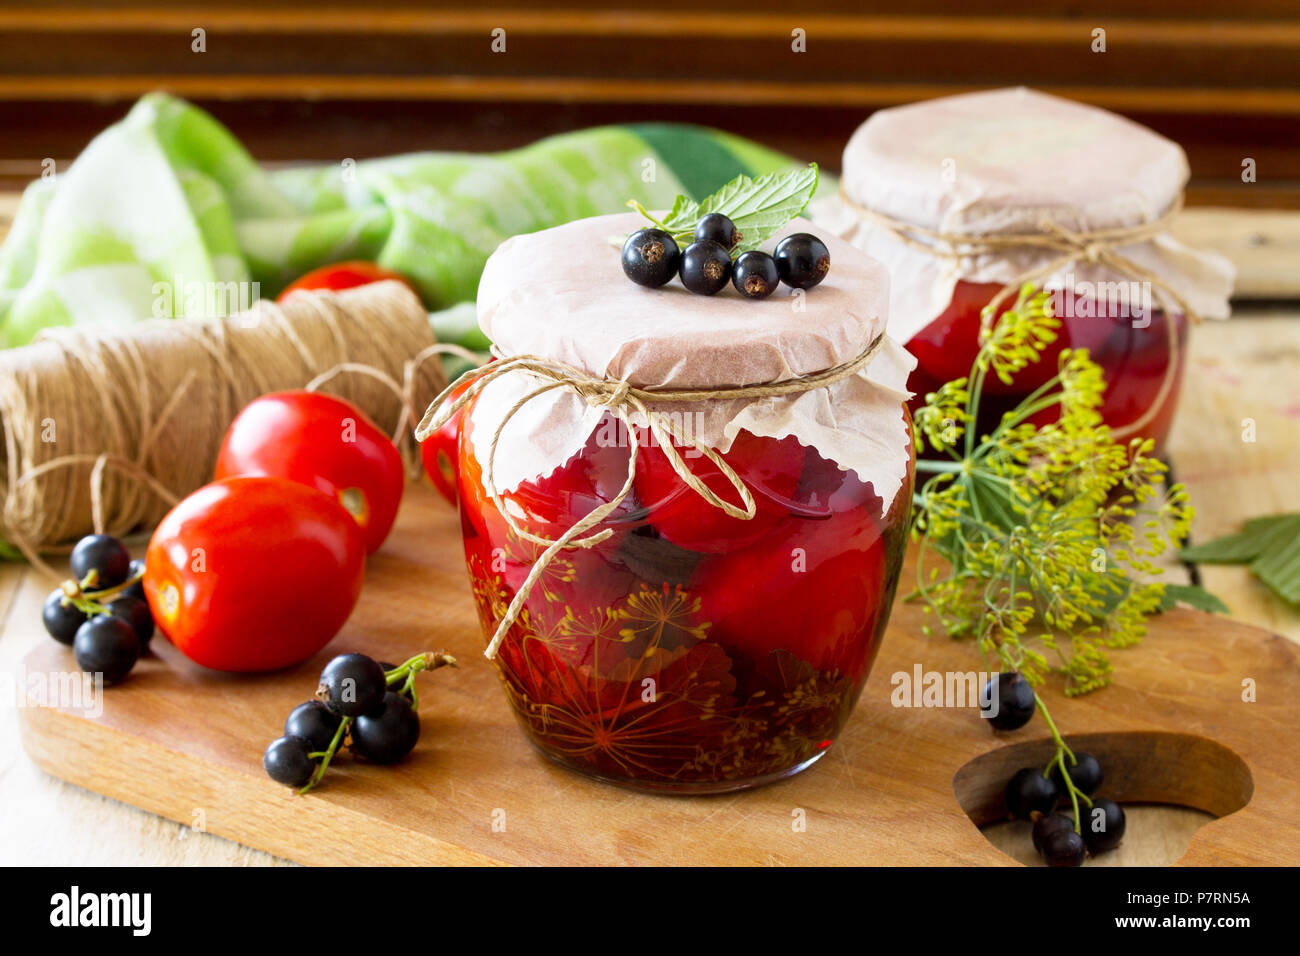 Marinated tomatoes. Pickles tomatoes with black currant on the kitchen table in a rustic style. Stock Photo